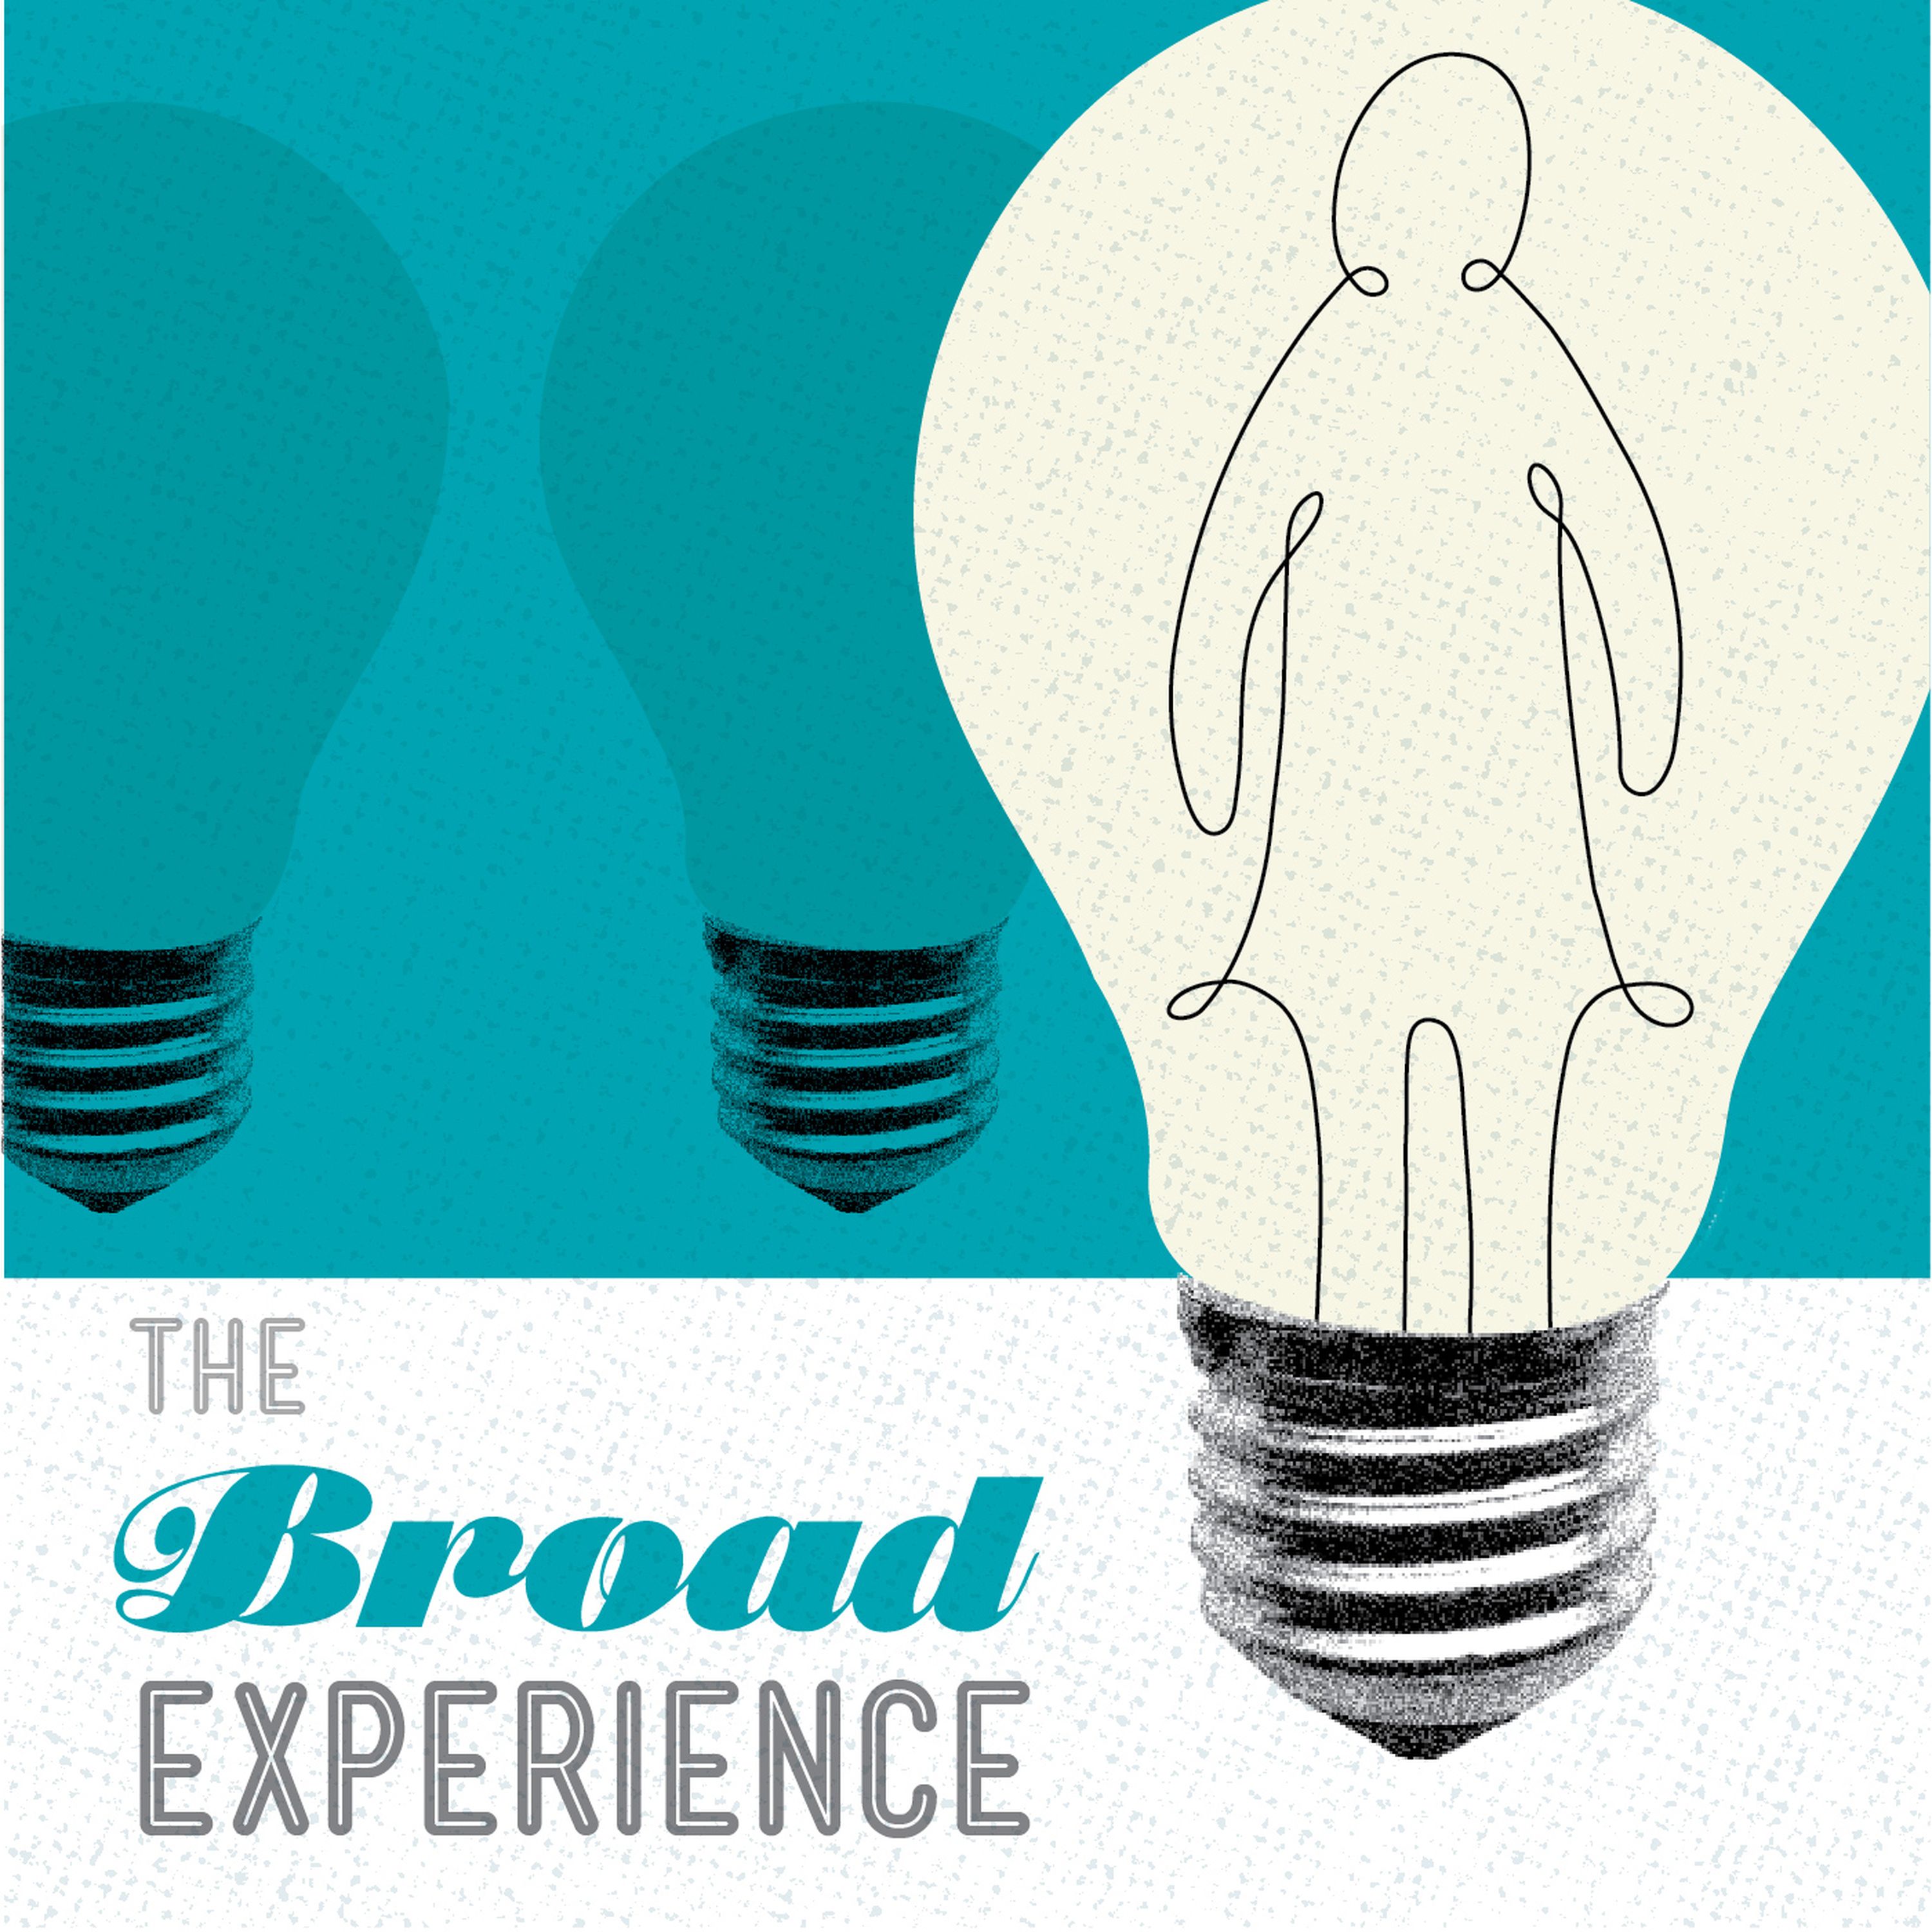 The Broad Experience, episode 6: The Levo League